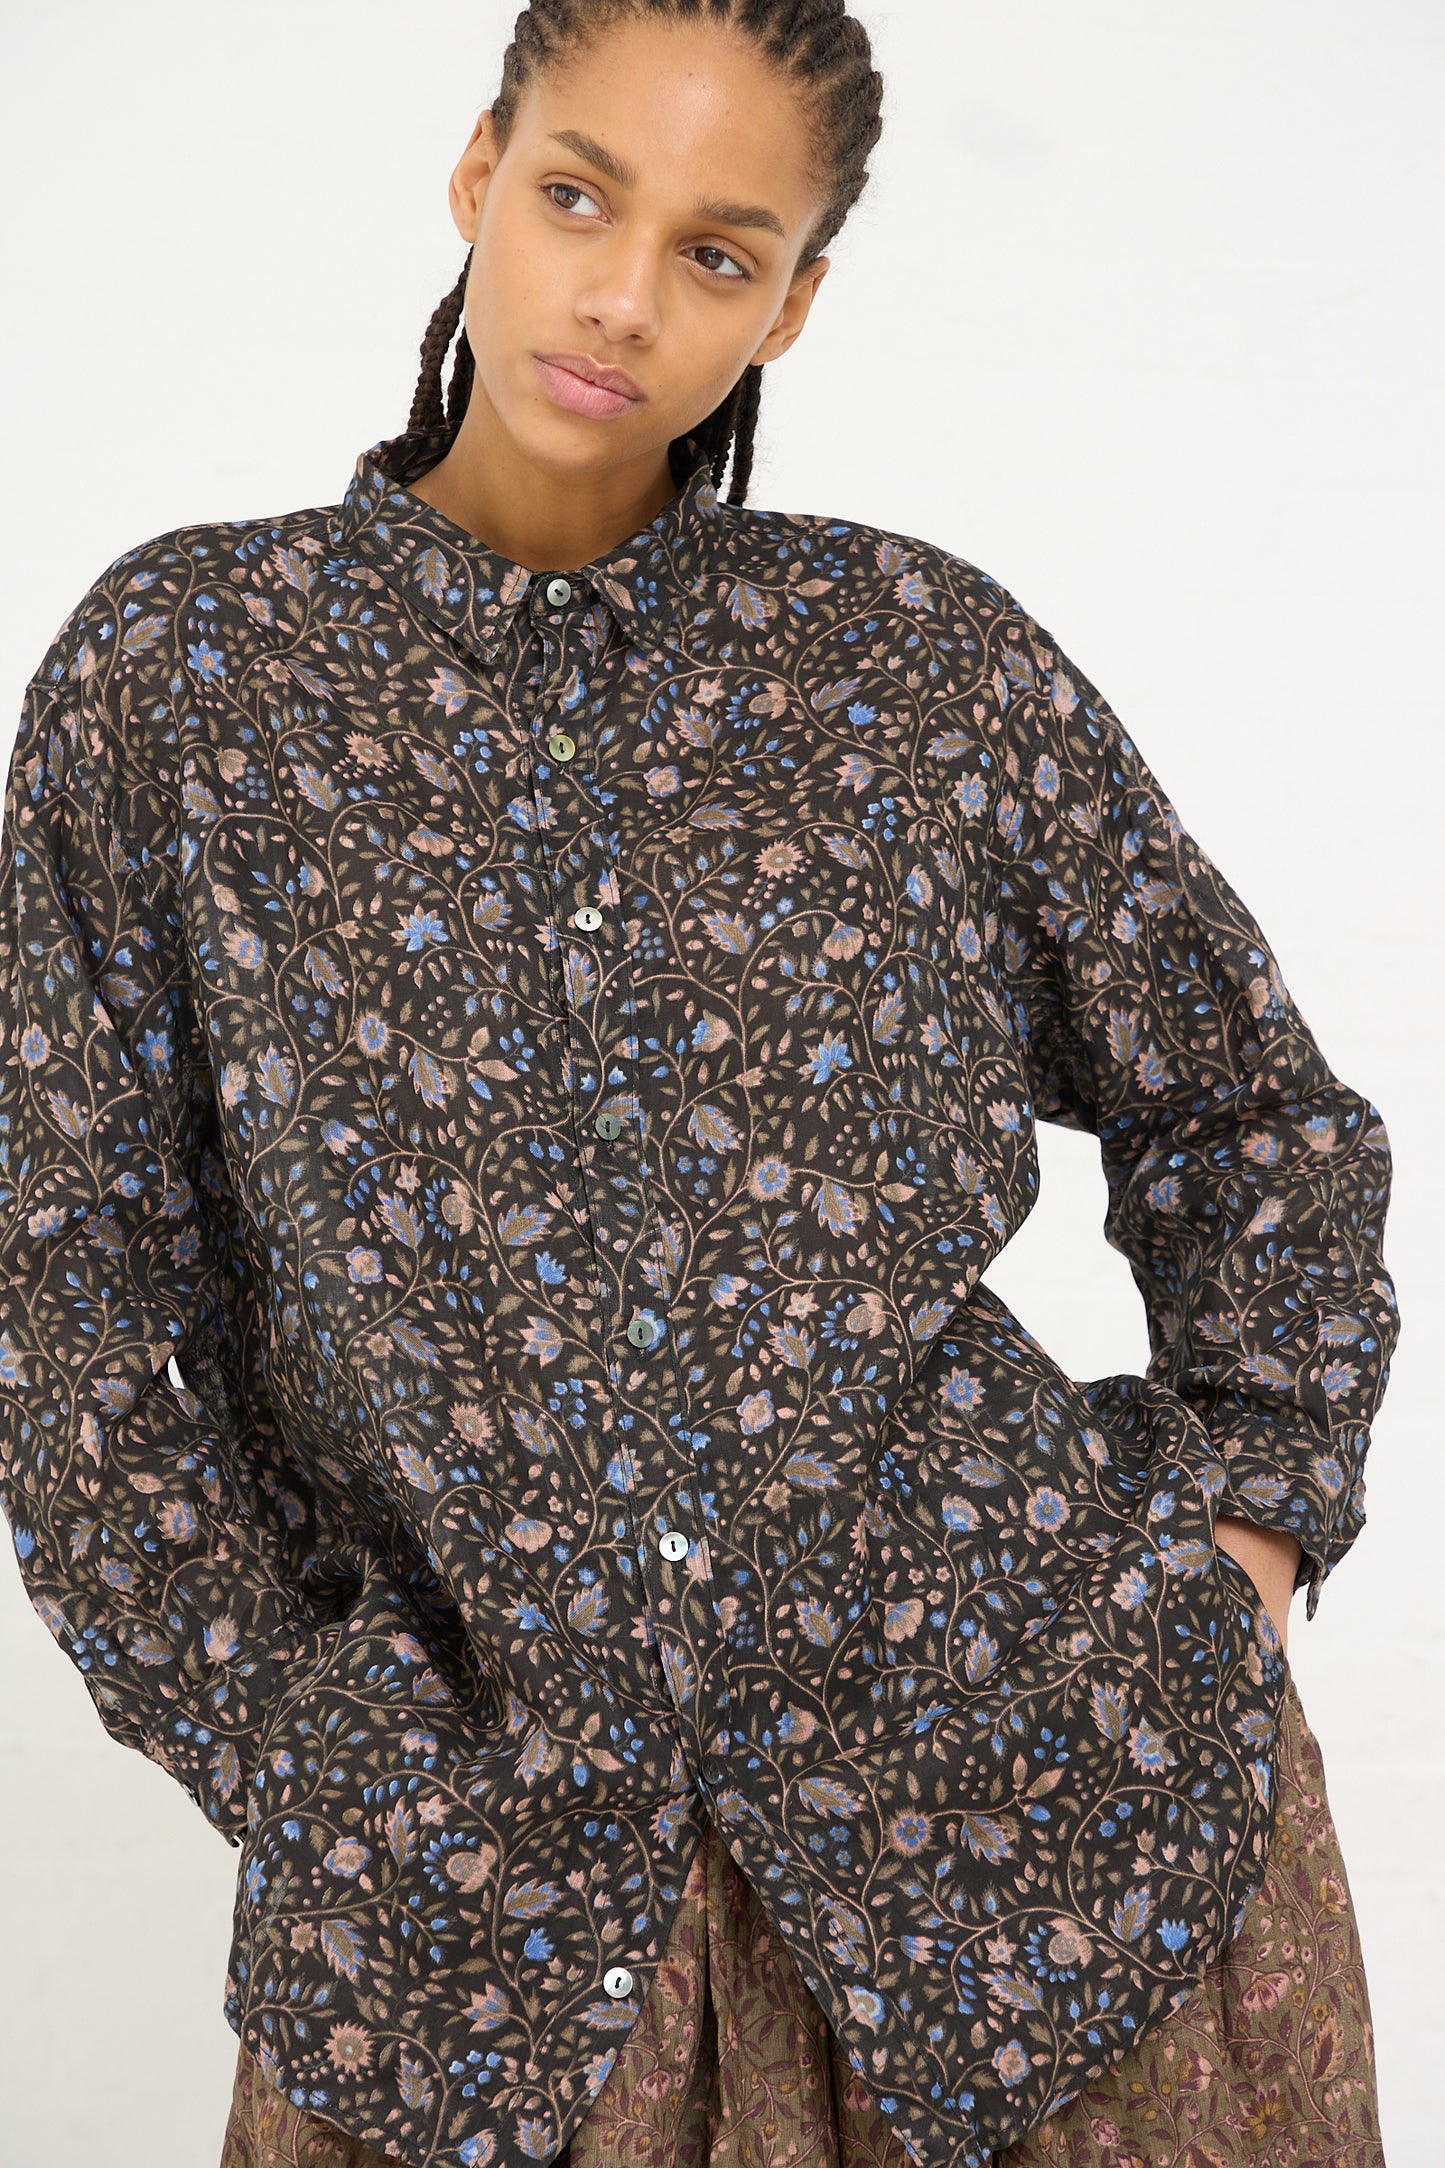 Woman posing in a Linen Floral Shirt in Black from Ichi Antiquités with hands on hips.